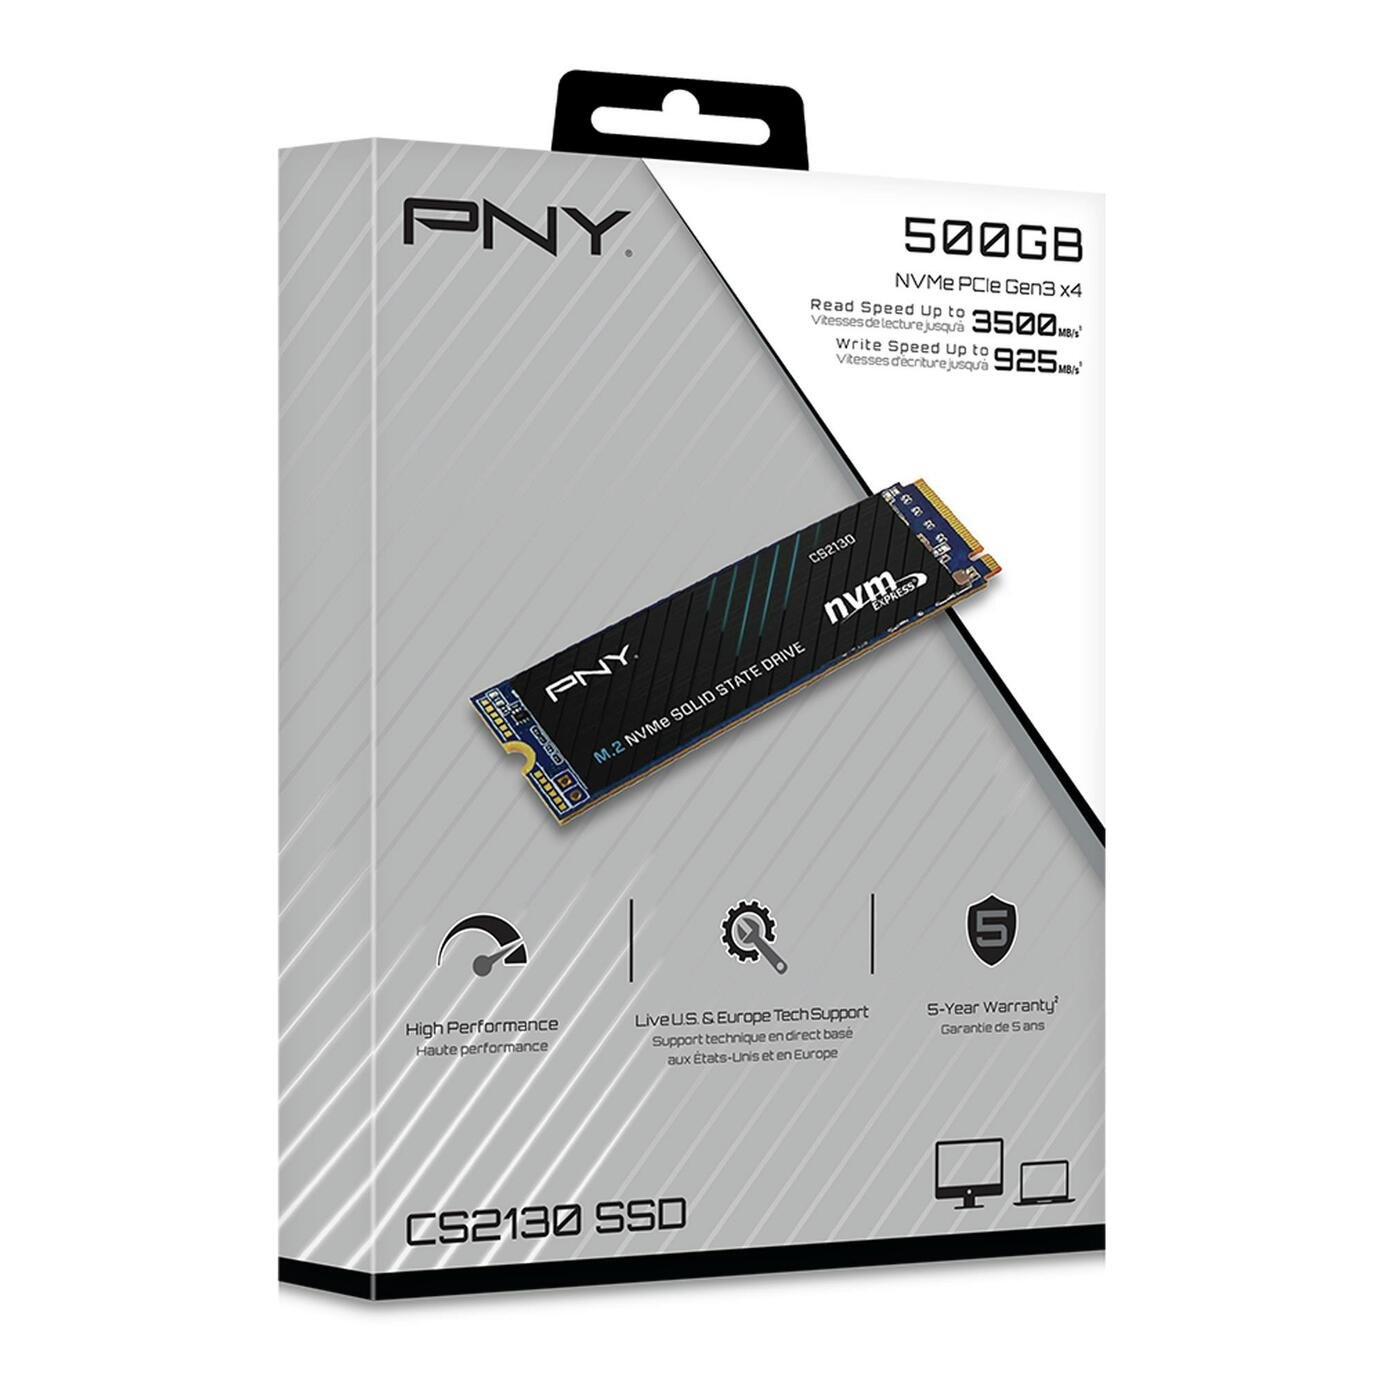 PNY CS2130 M.2 500GB Solid State SSD Interal Hard Drive Review